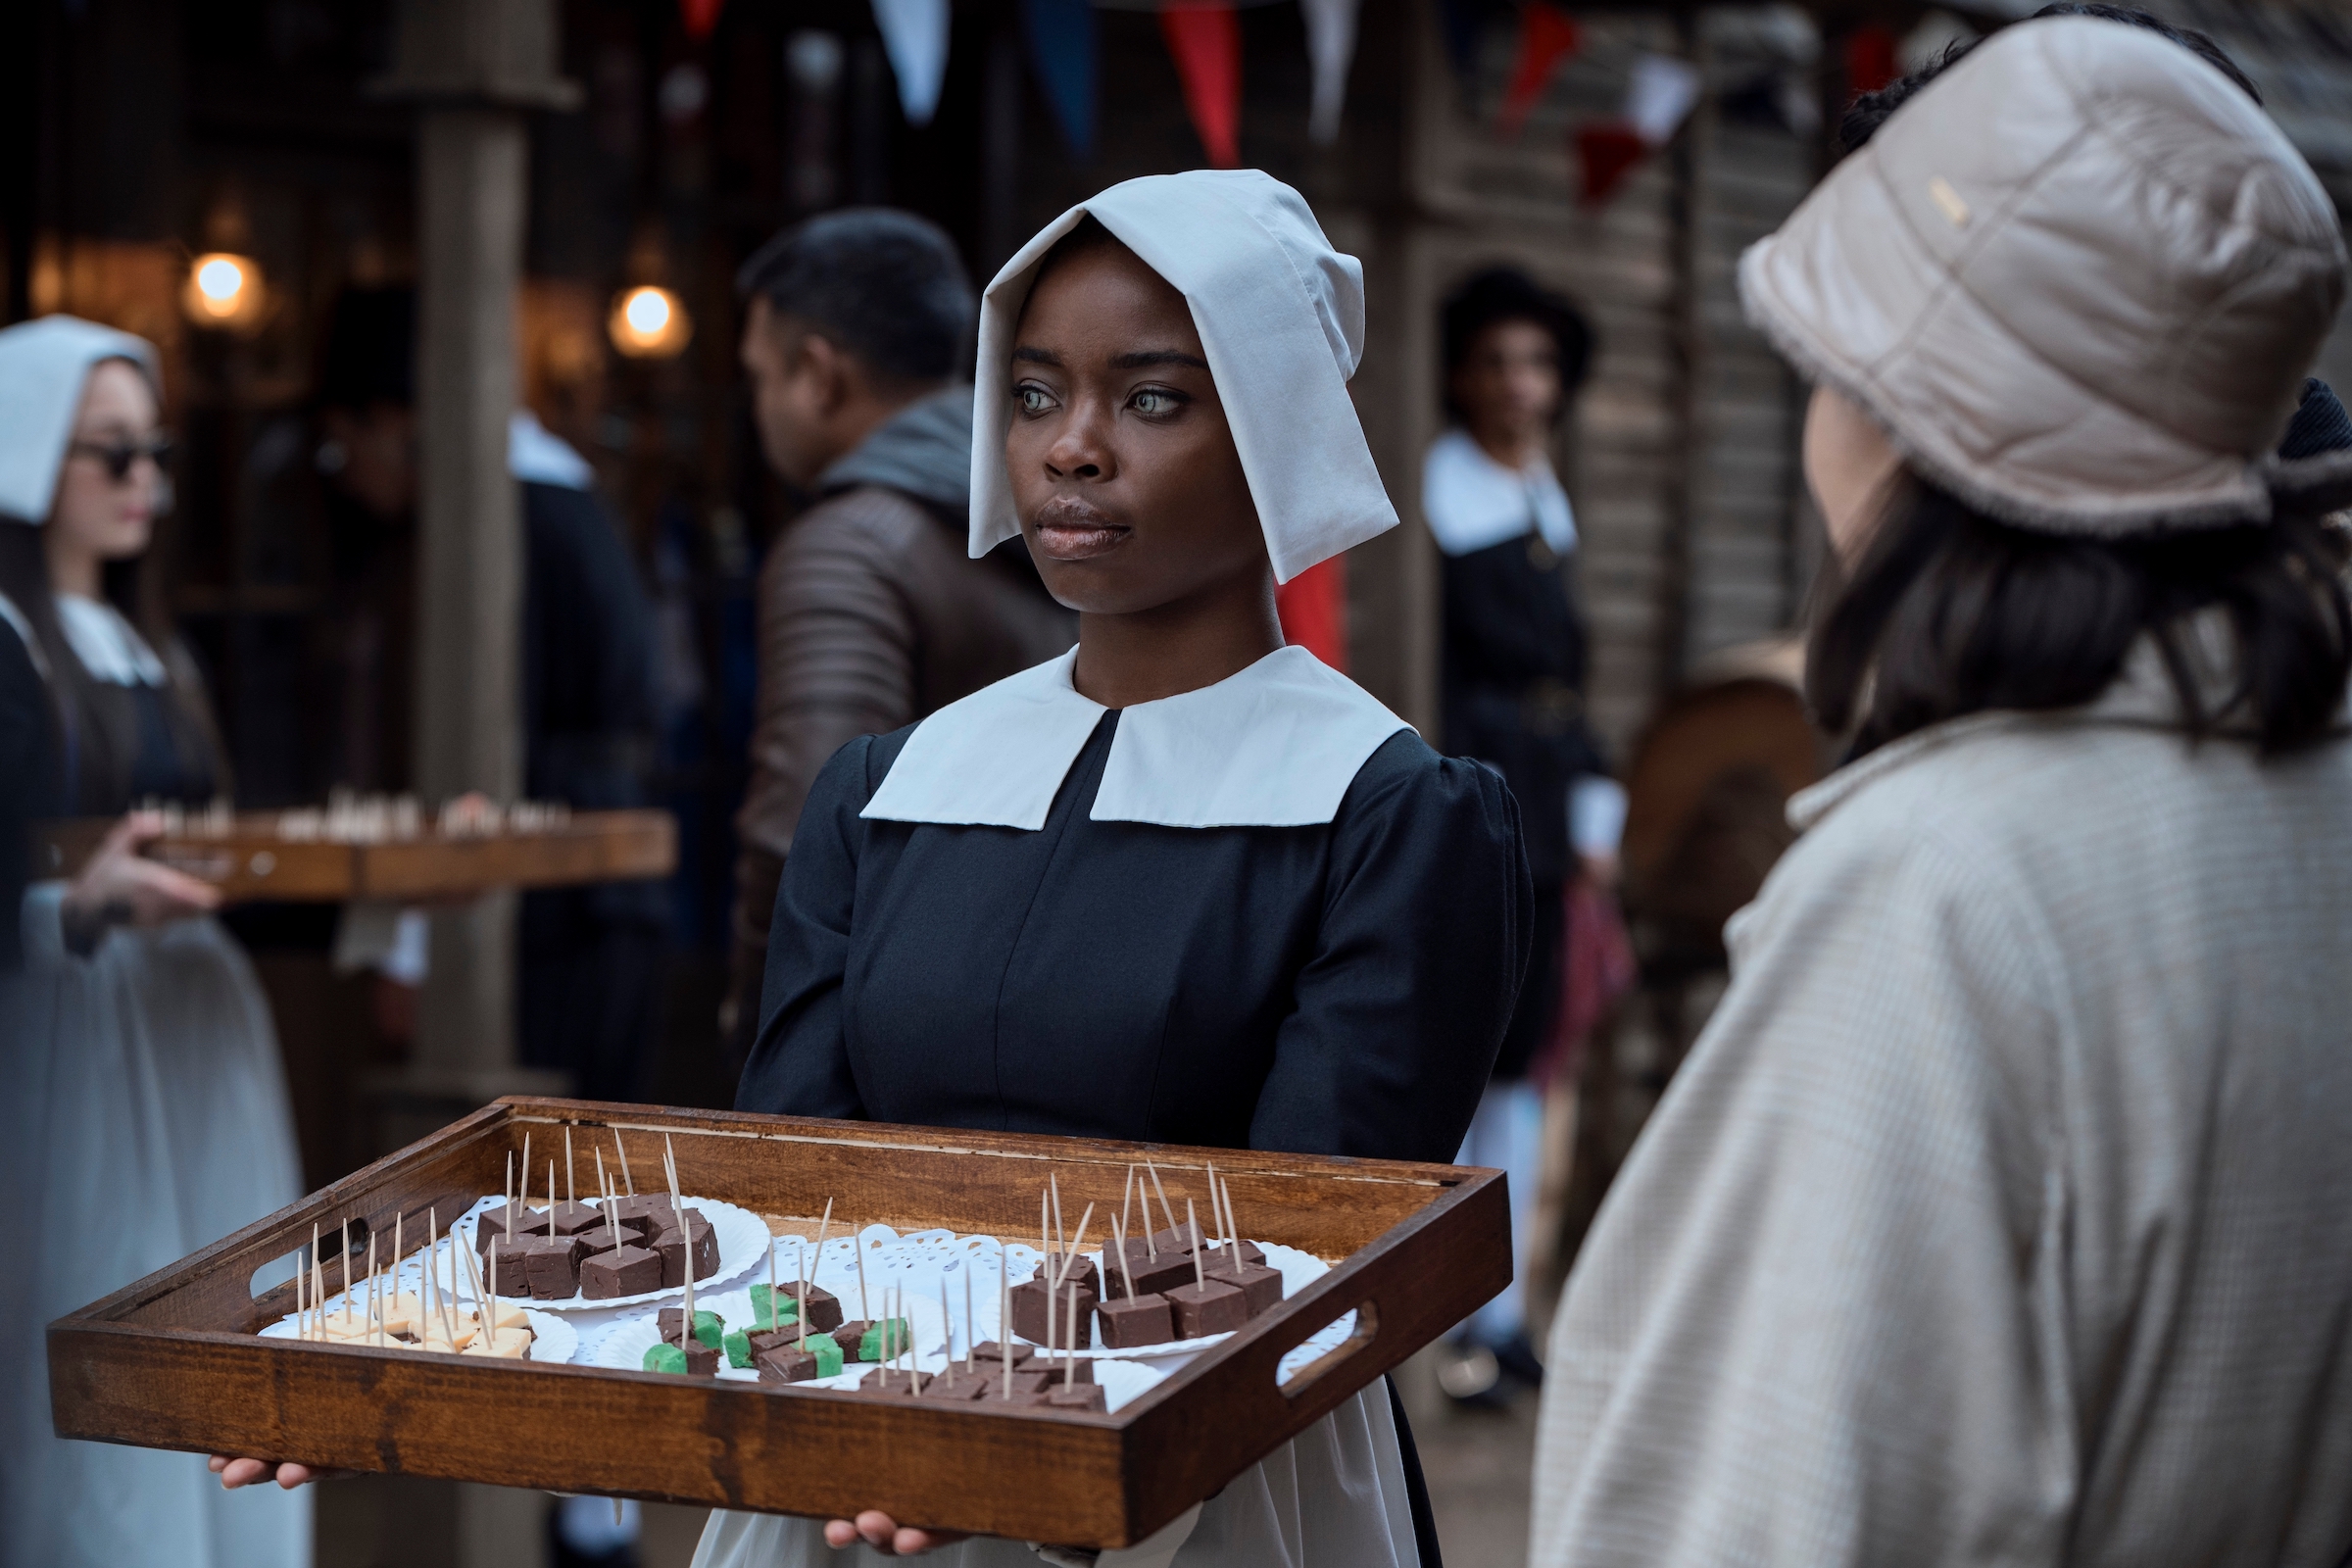 Bianca Barclay (Joy Sunday), wearing a black and white pilgrim outfit, holds out a wooden tray of fudge samples with toothpicks in them.